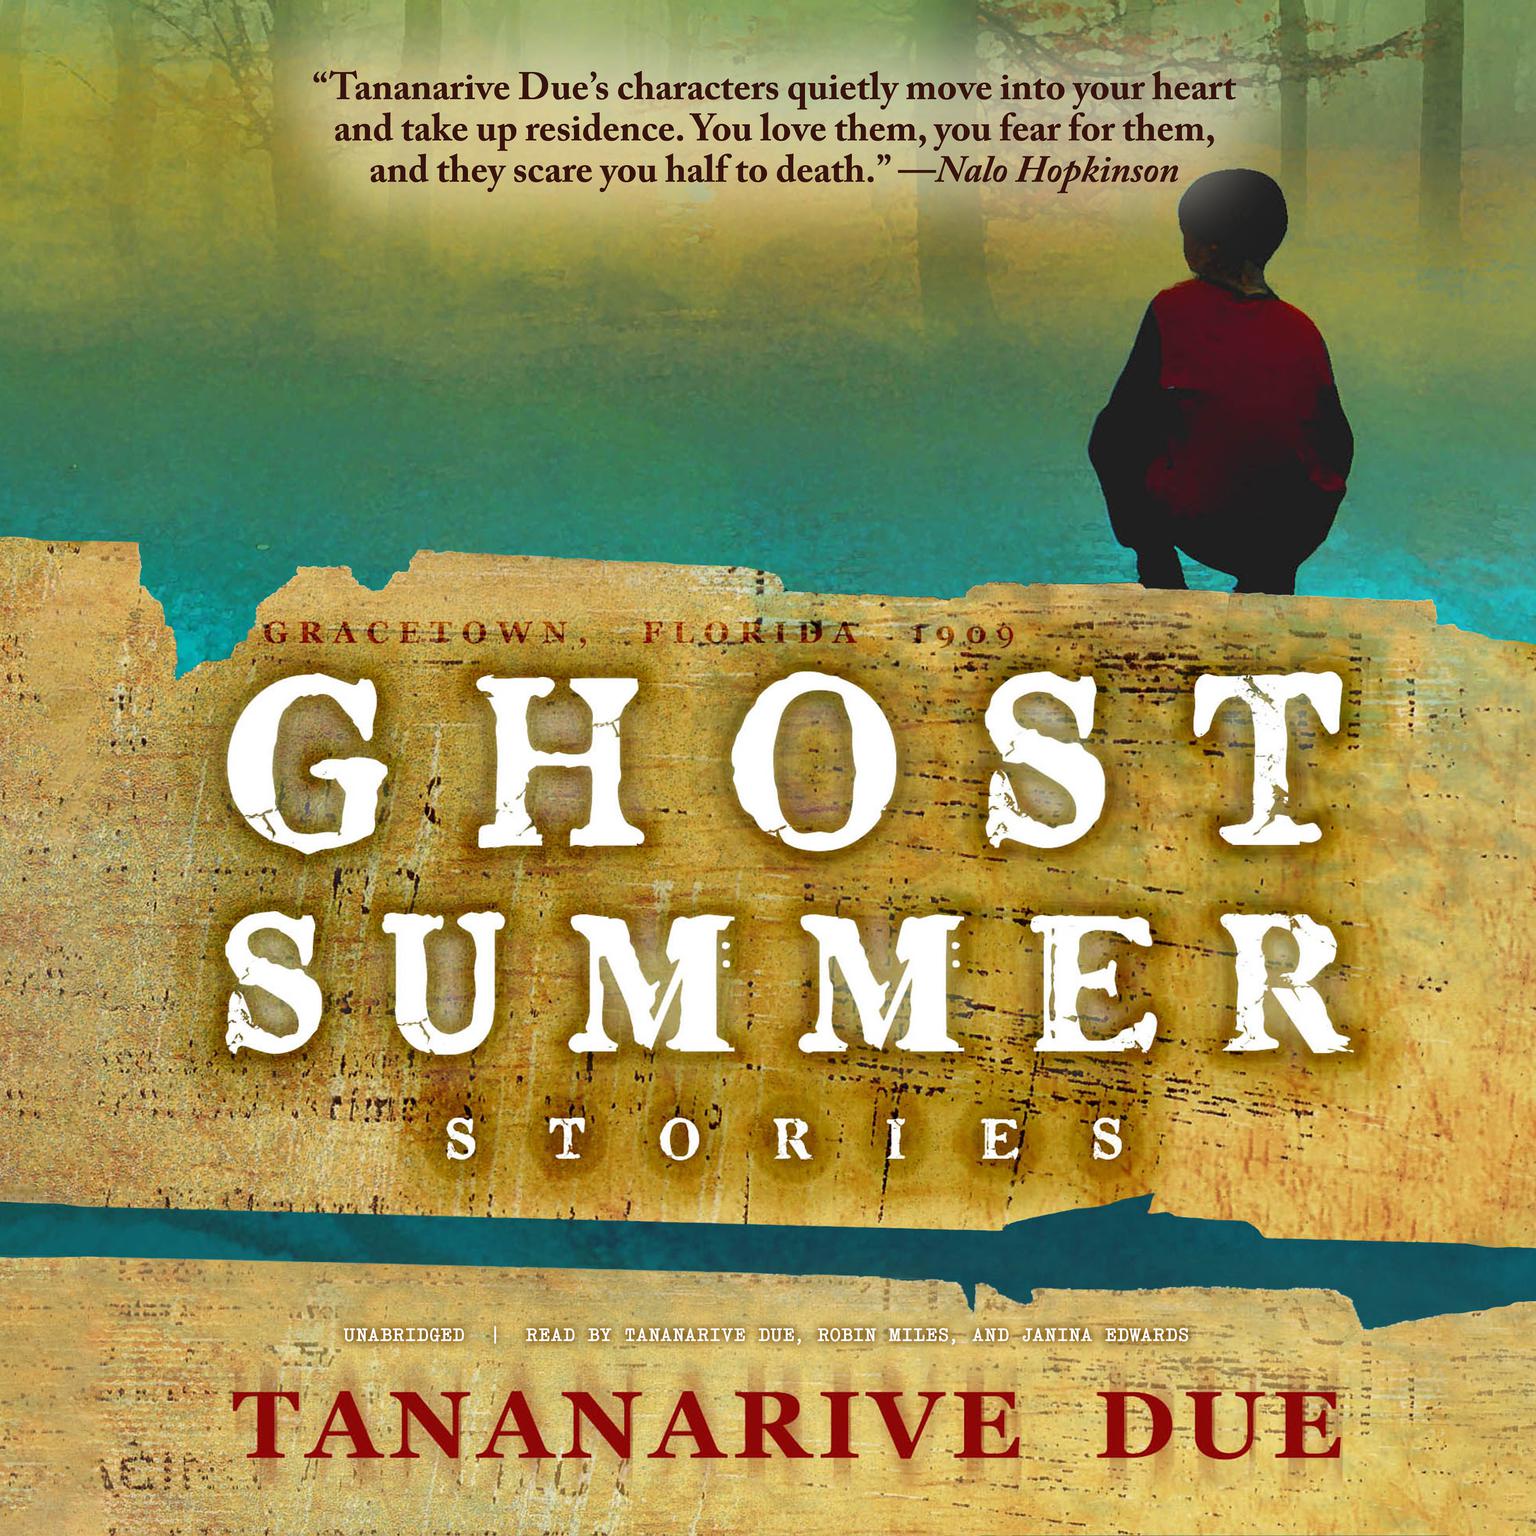 Ghost Summer: Stories Audiobook, by Tananarive Due